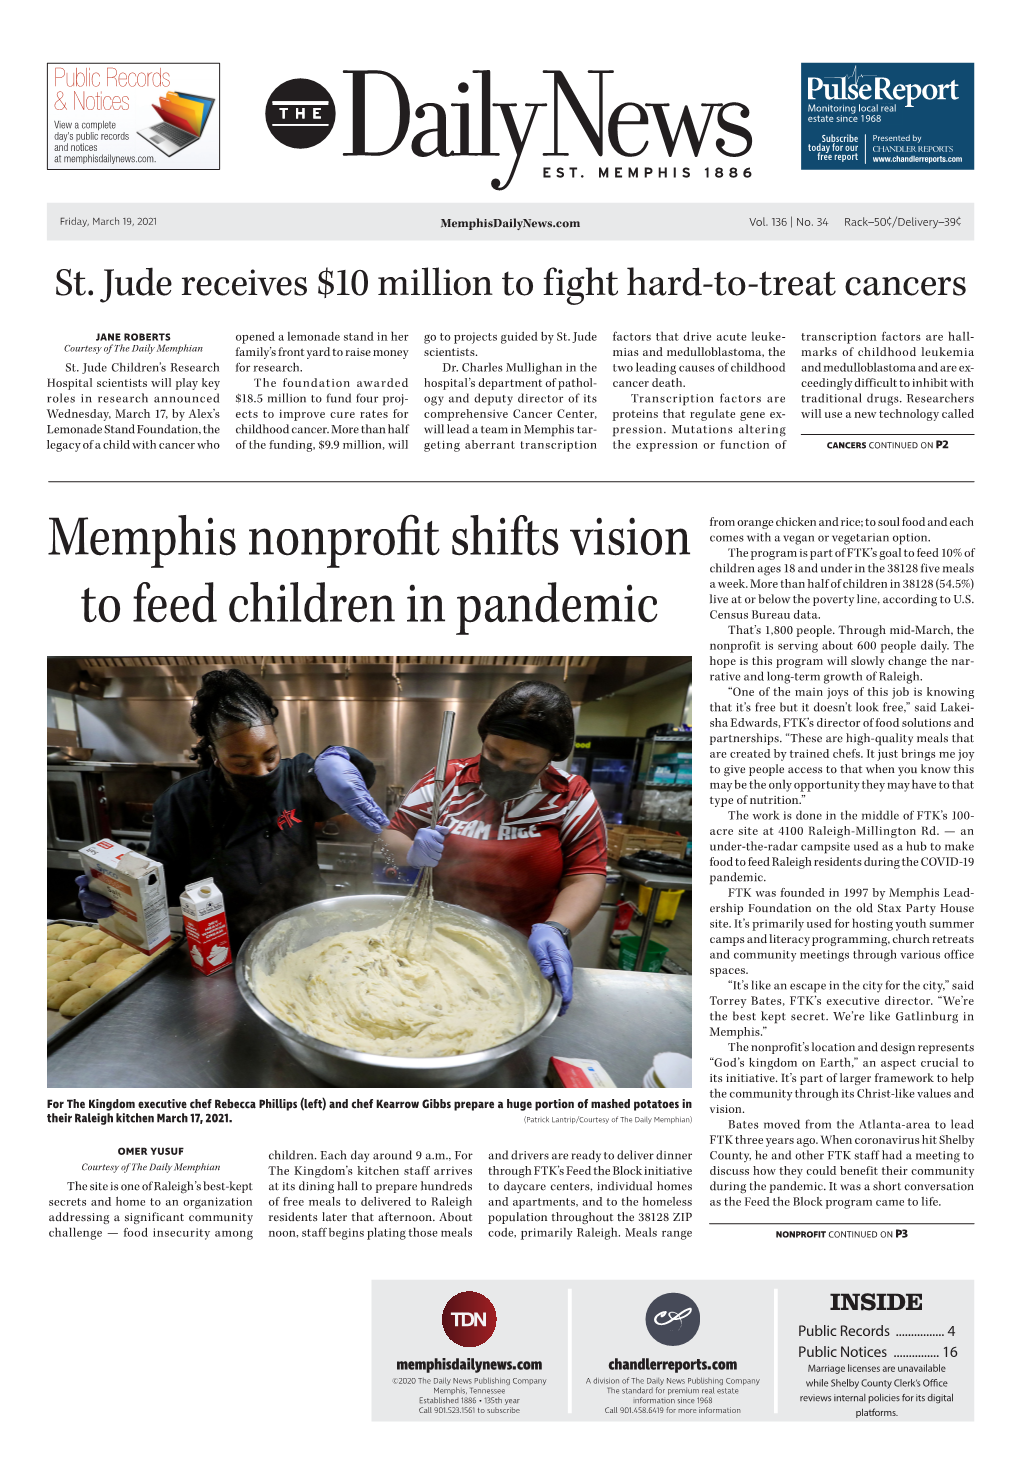 Memphis Nonprofit Shifts Vision to Feed Children in Pandemic